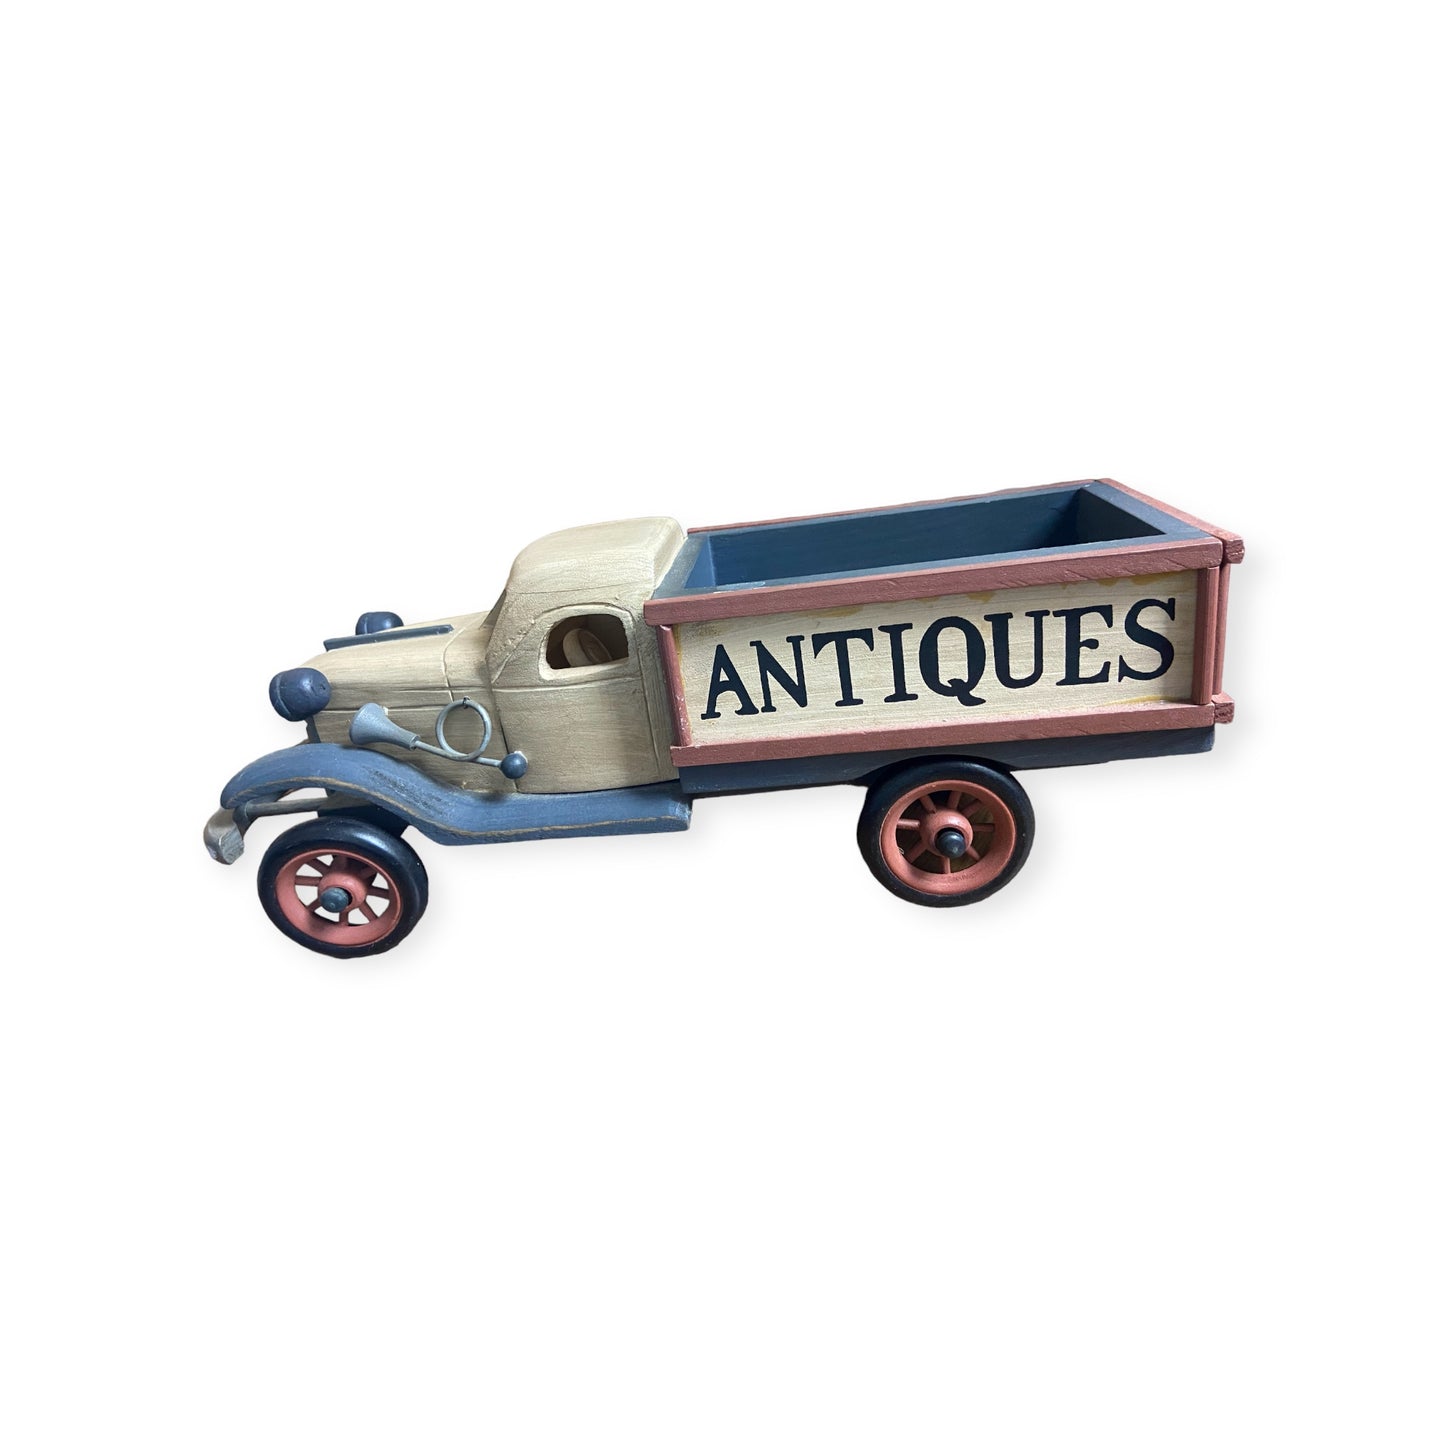 “Antiques” Wooden Model Open Delivery Truck